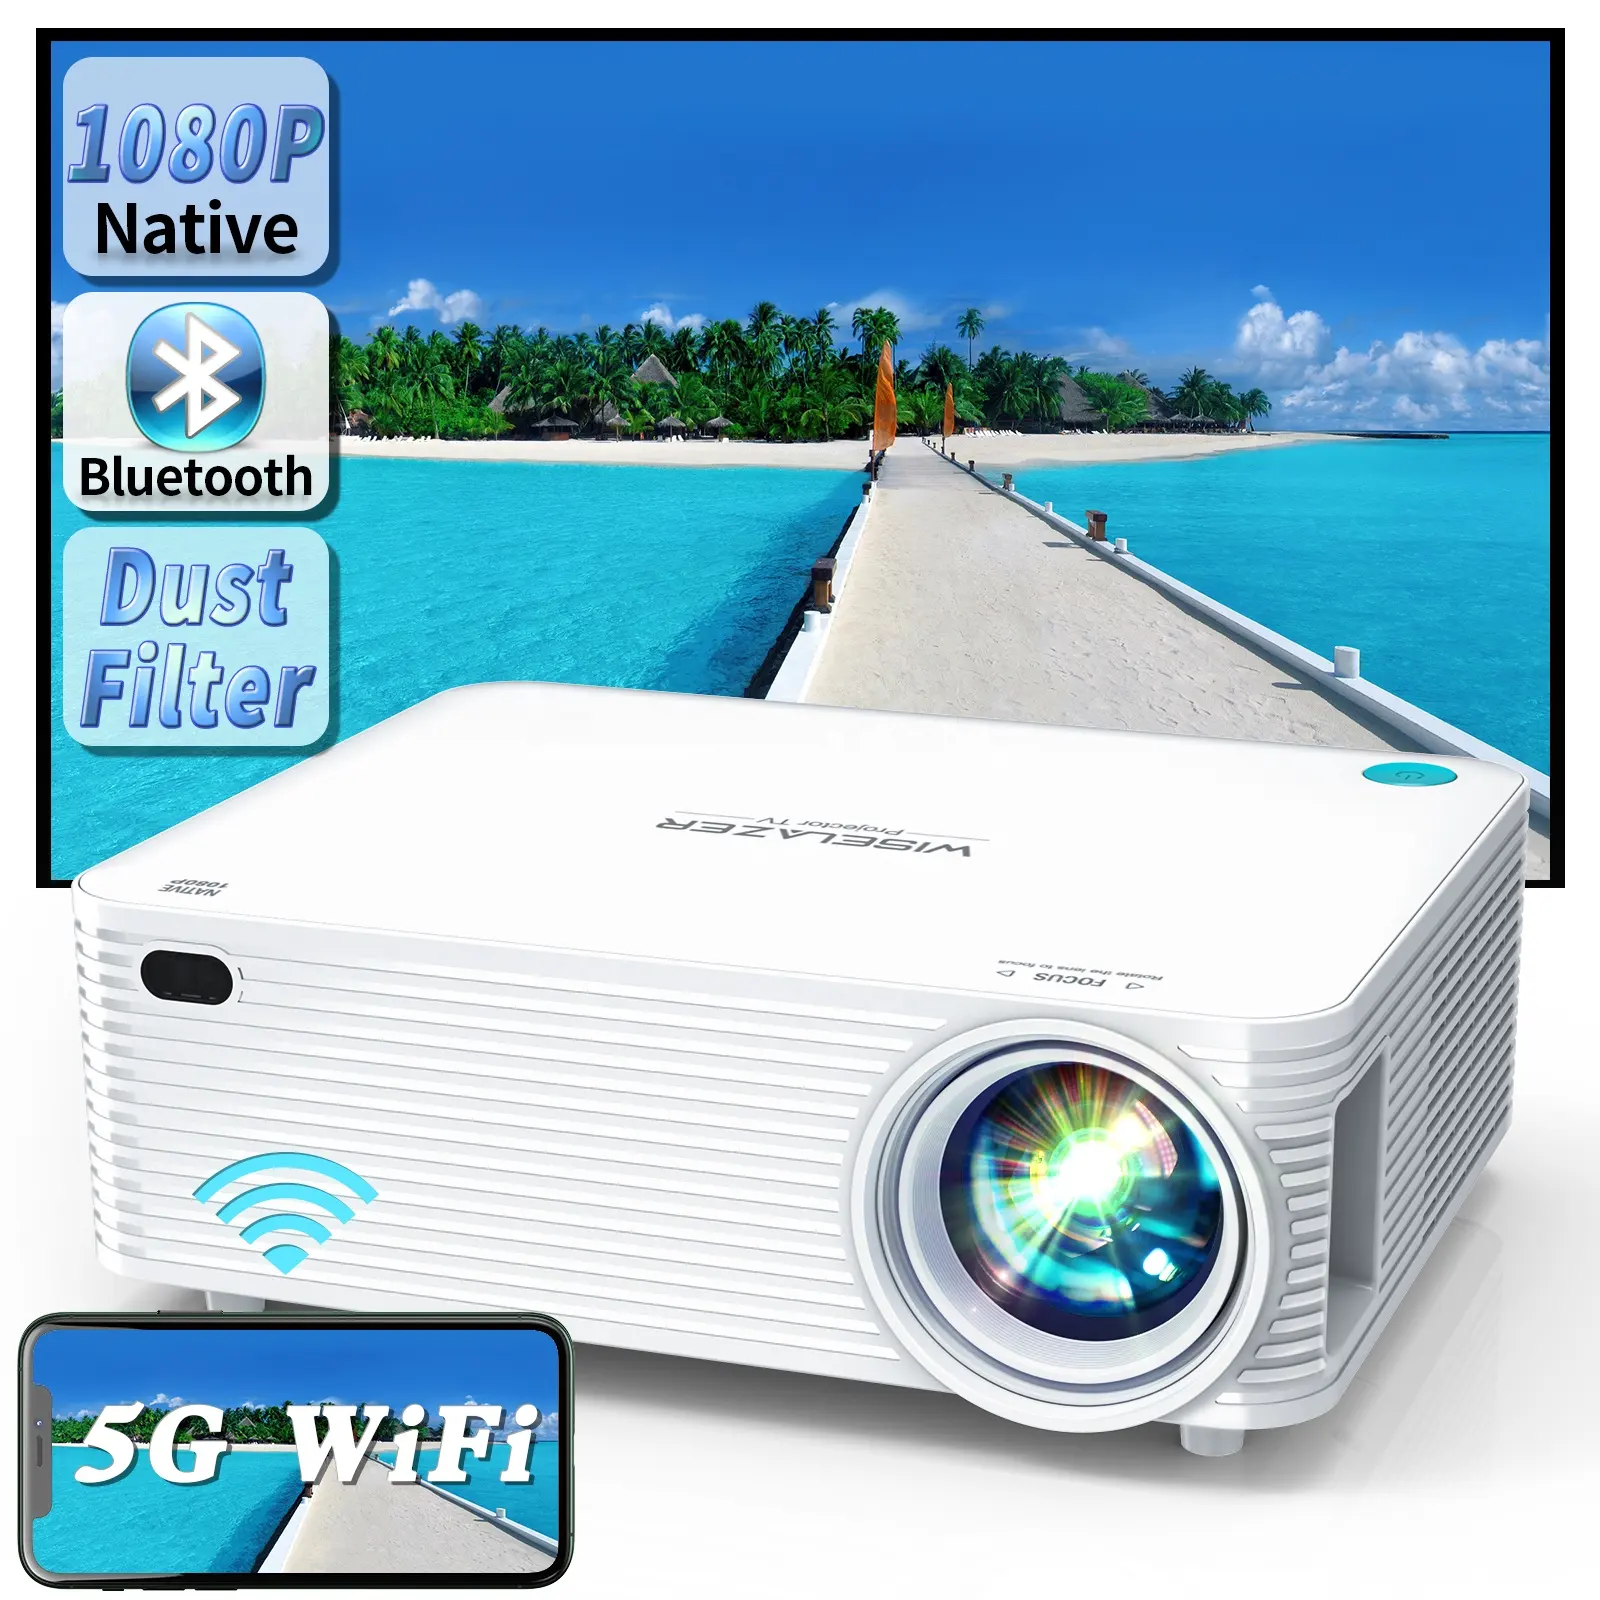 WISELAZER 2022 New Design 1080P LCD 9500 Lumens Full HD Home Theater Video LED Portable Projector for Movie Education Projector